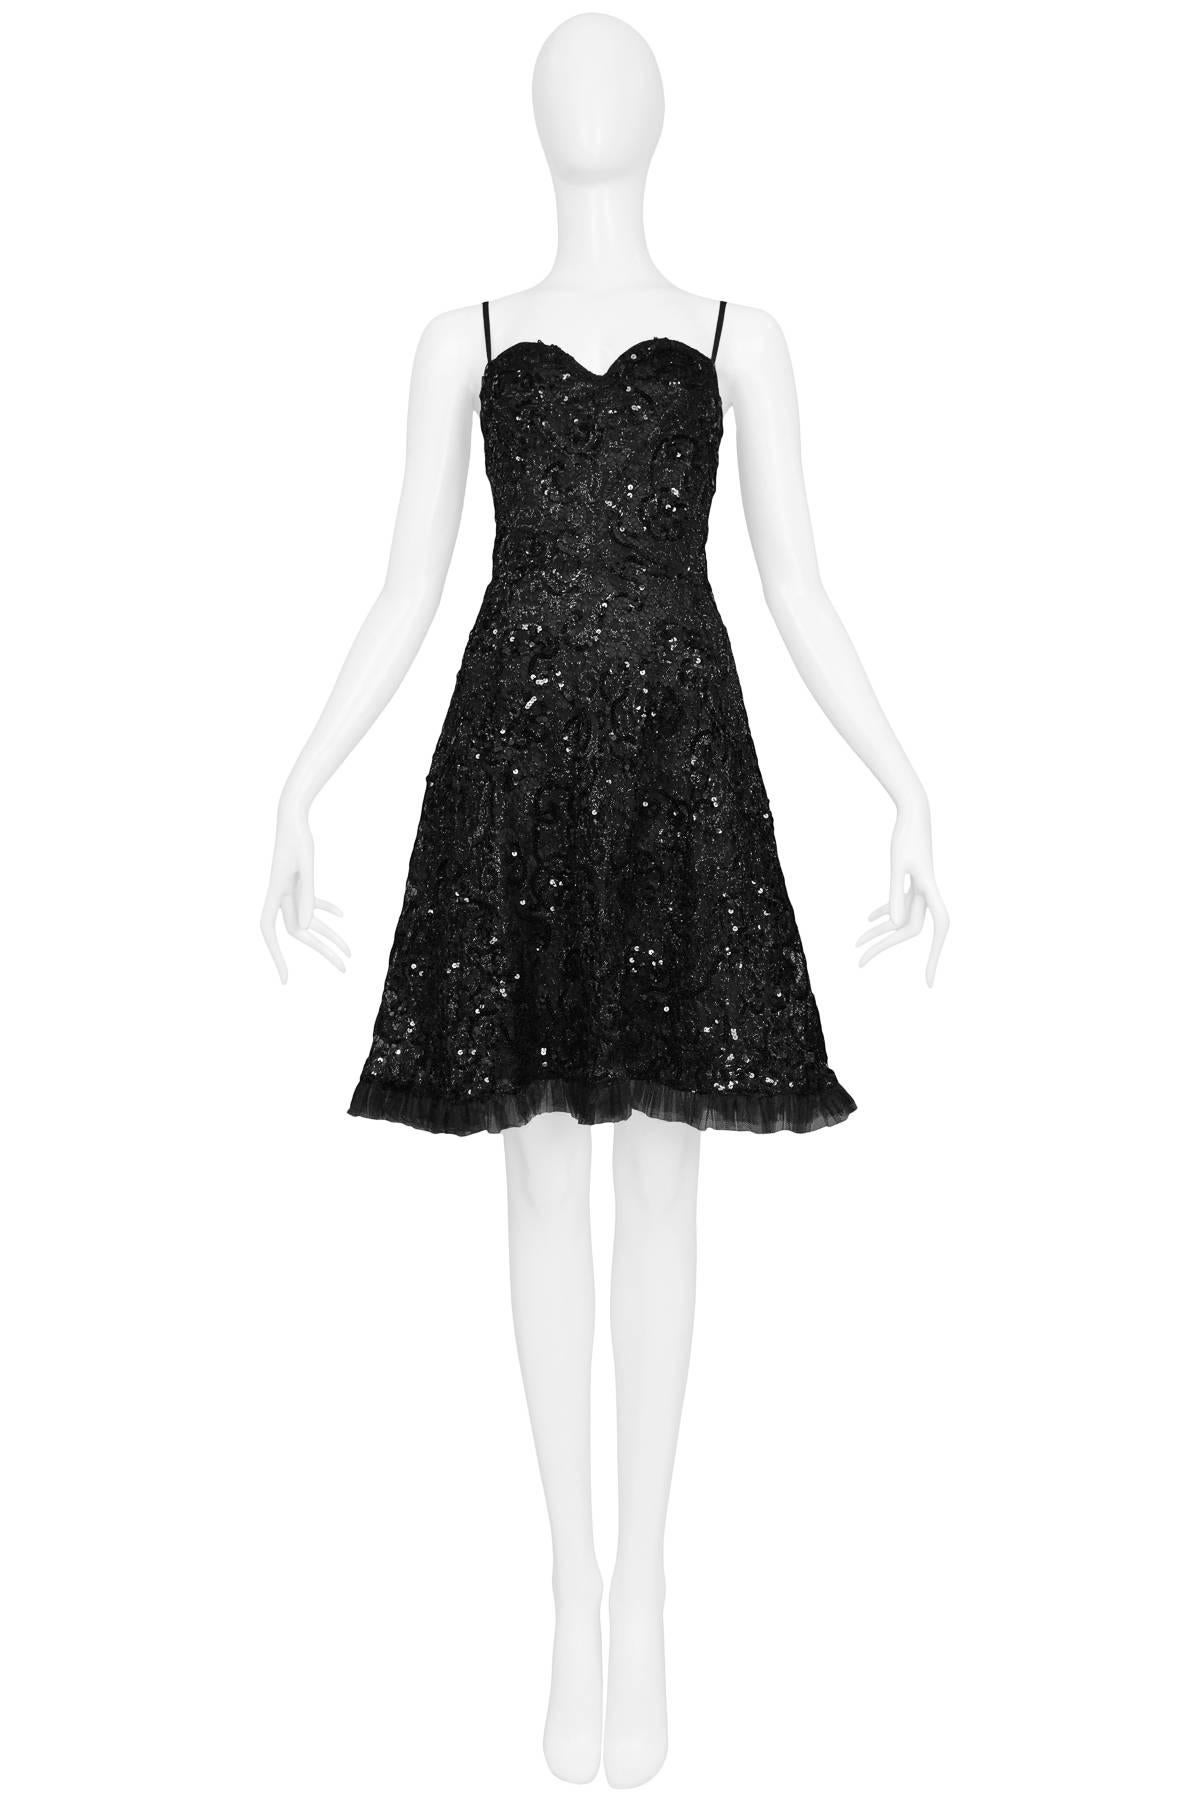 Original black lace and sequin Yves Saint Laurent cocktail dress with black organza ruffle hem and sweetheart neckline. Circa late 1970's. 